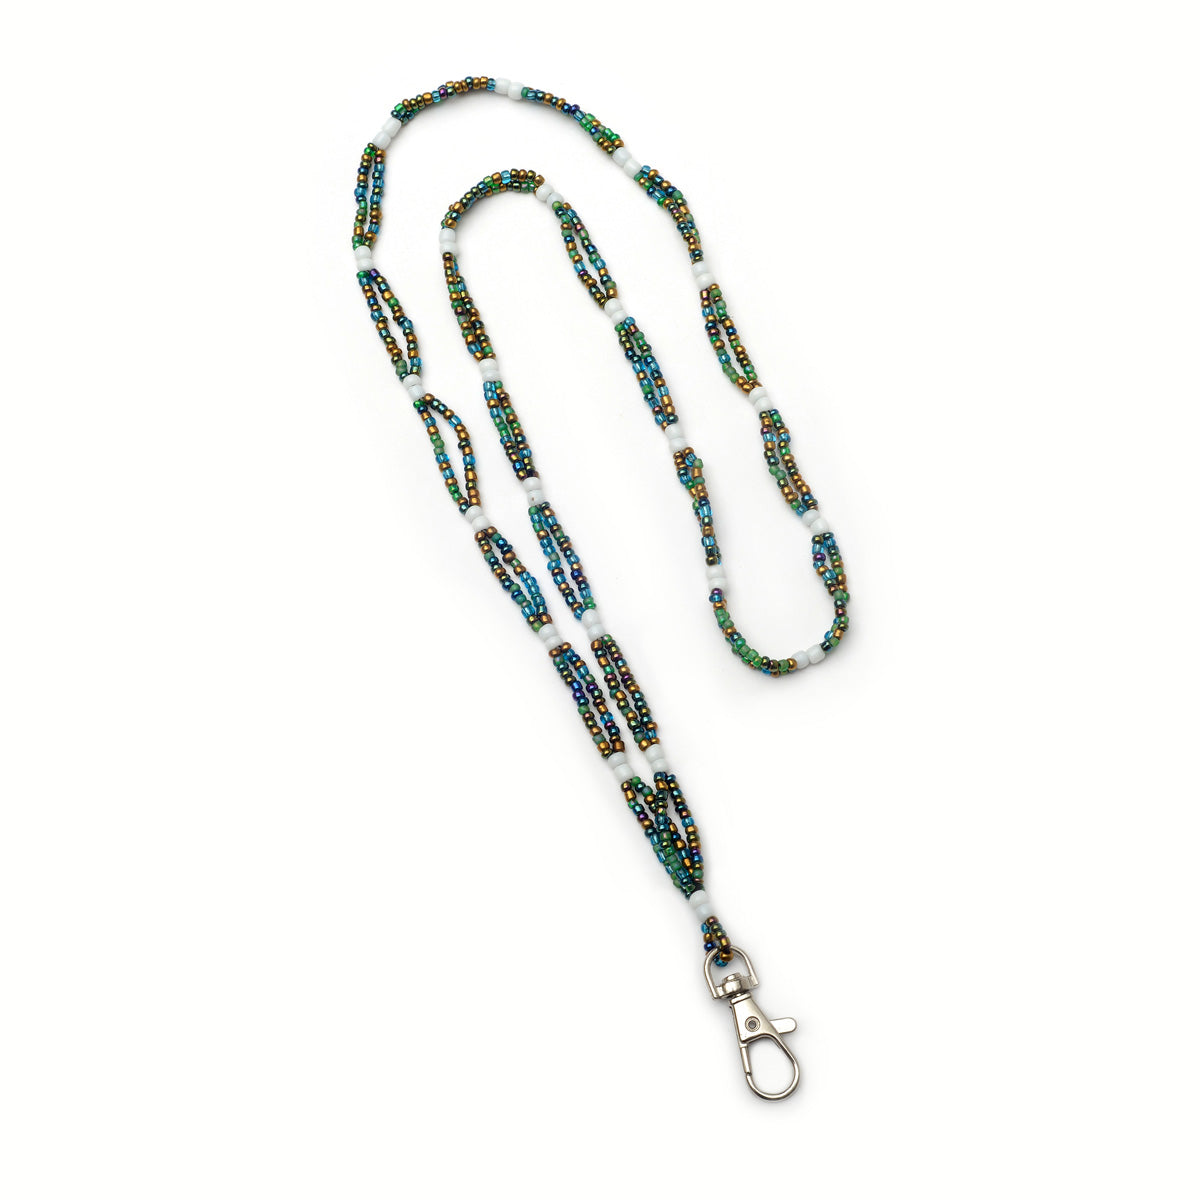 Beaded Lanyard: Double String Lanyard with Snap Hook